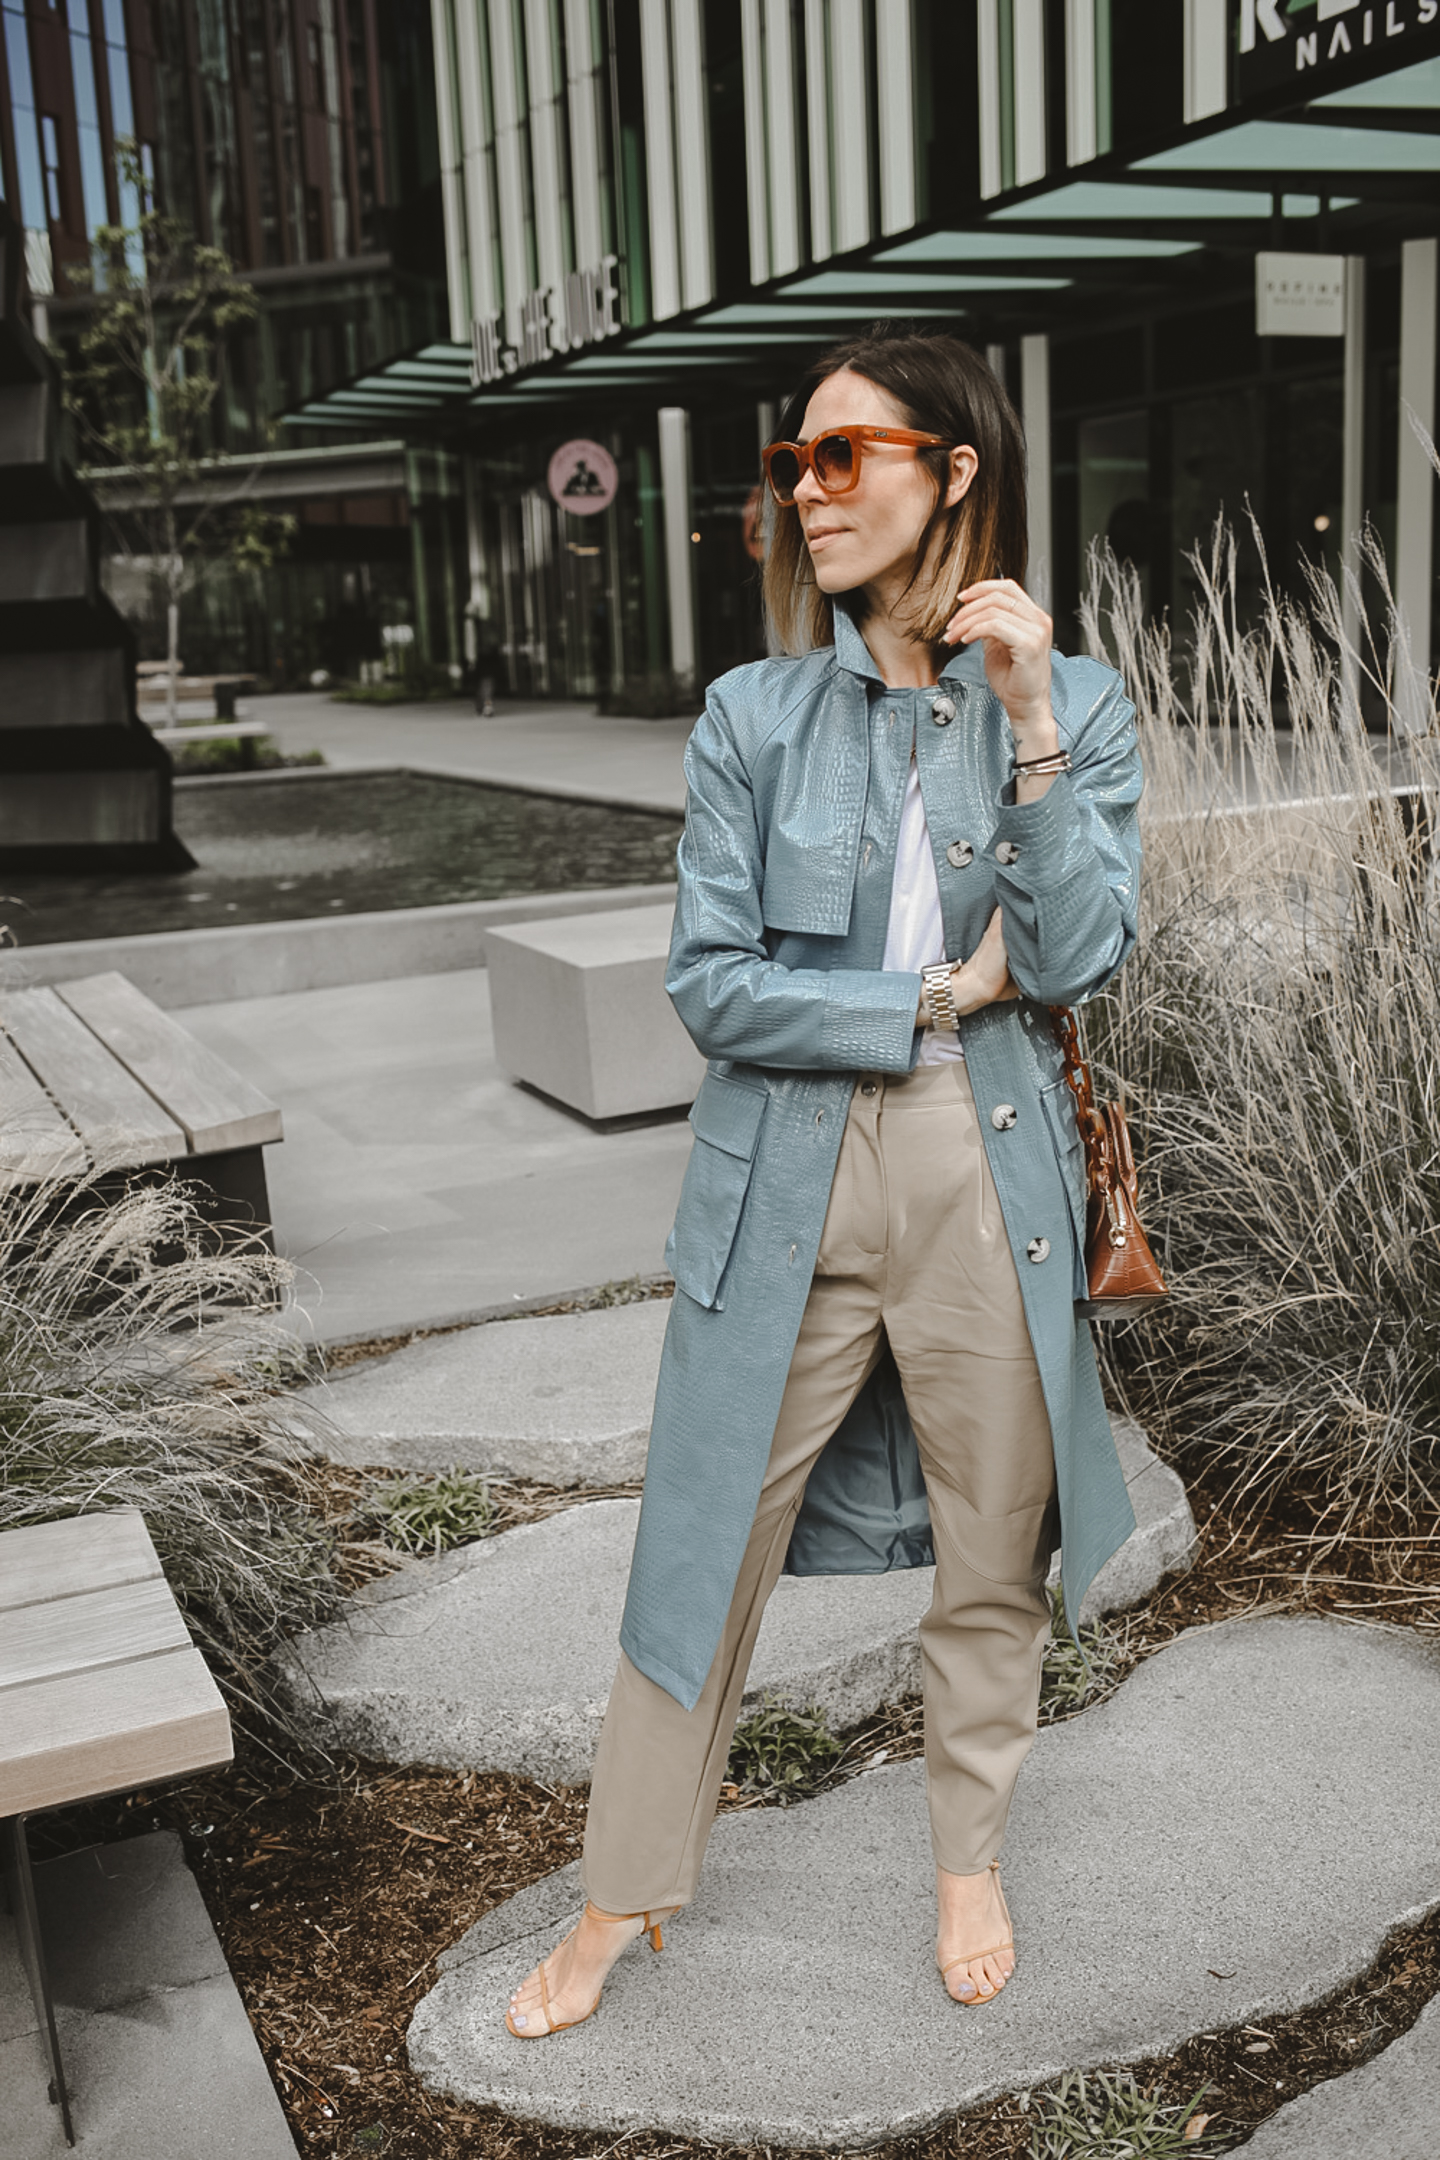 Mary of Sportsanista - April Stylelogue - Seattle Bloggers - Trend Story - Vegan Leather Separates